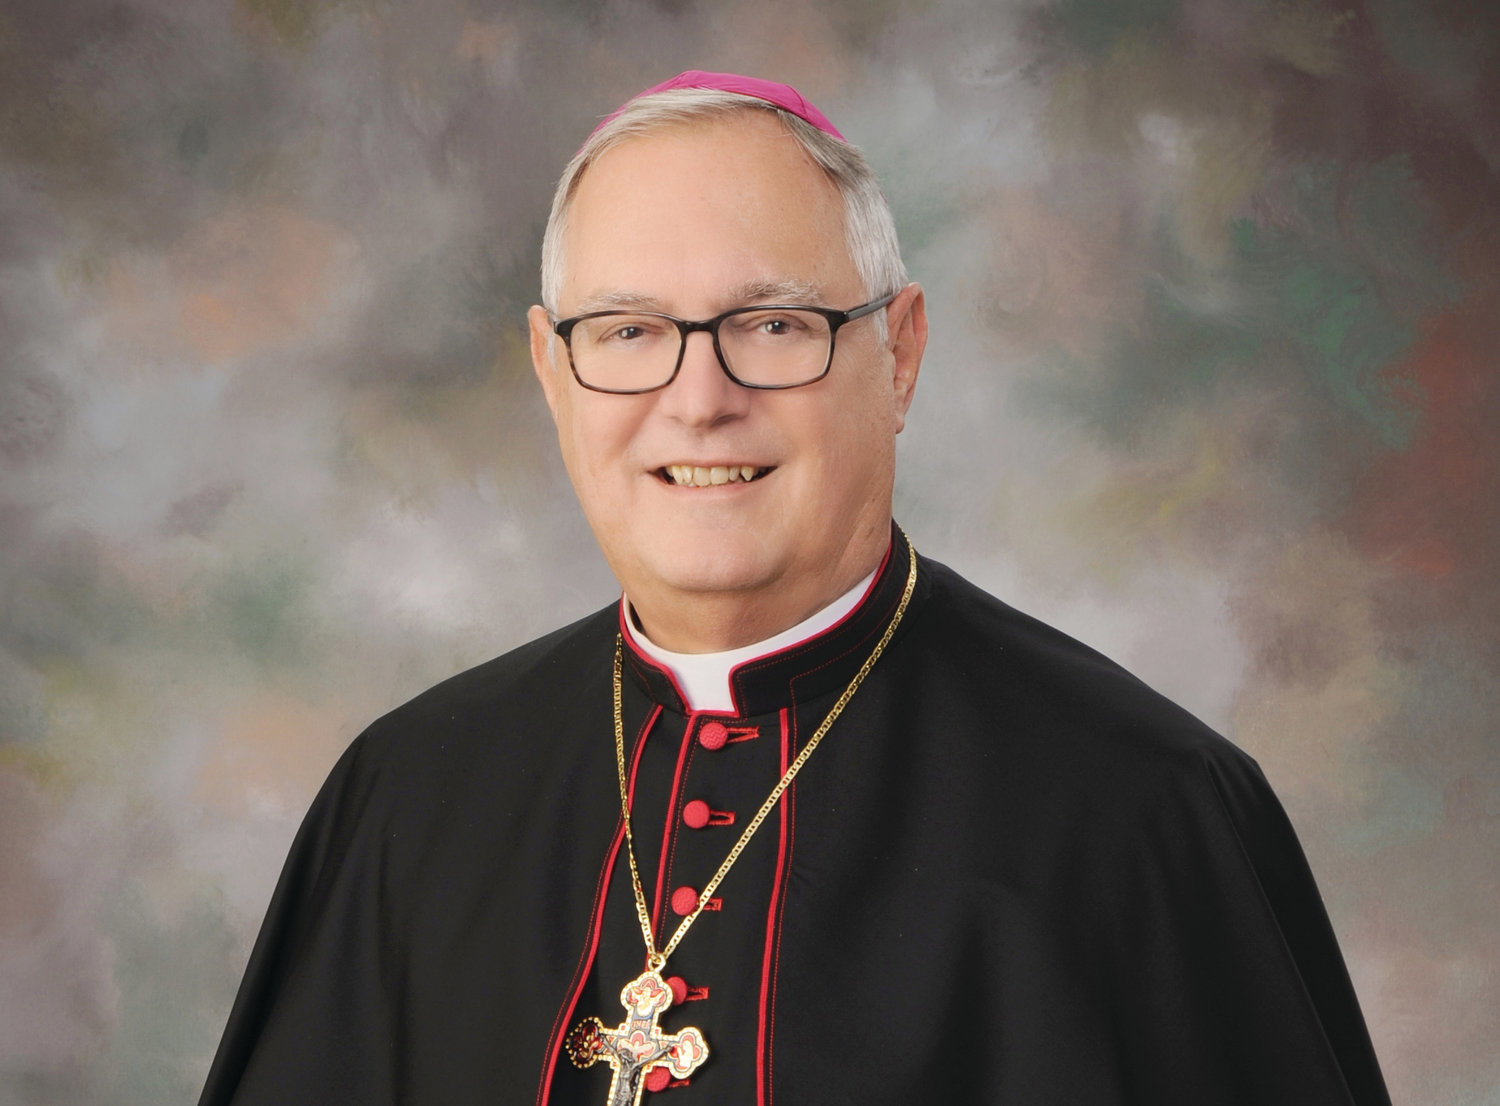 The Most Rev. Thomas J. Tobin
Bishop of the DIocese of Providence